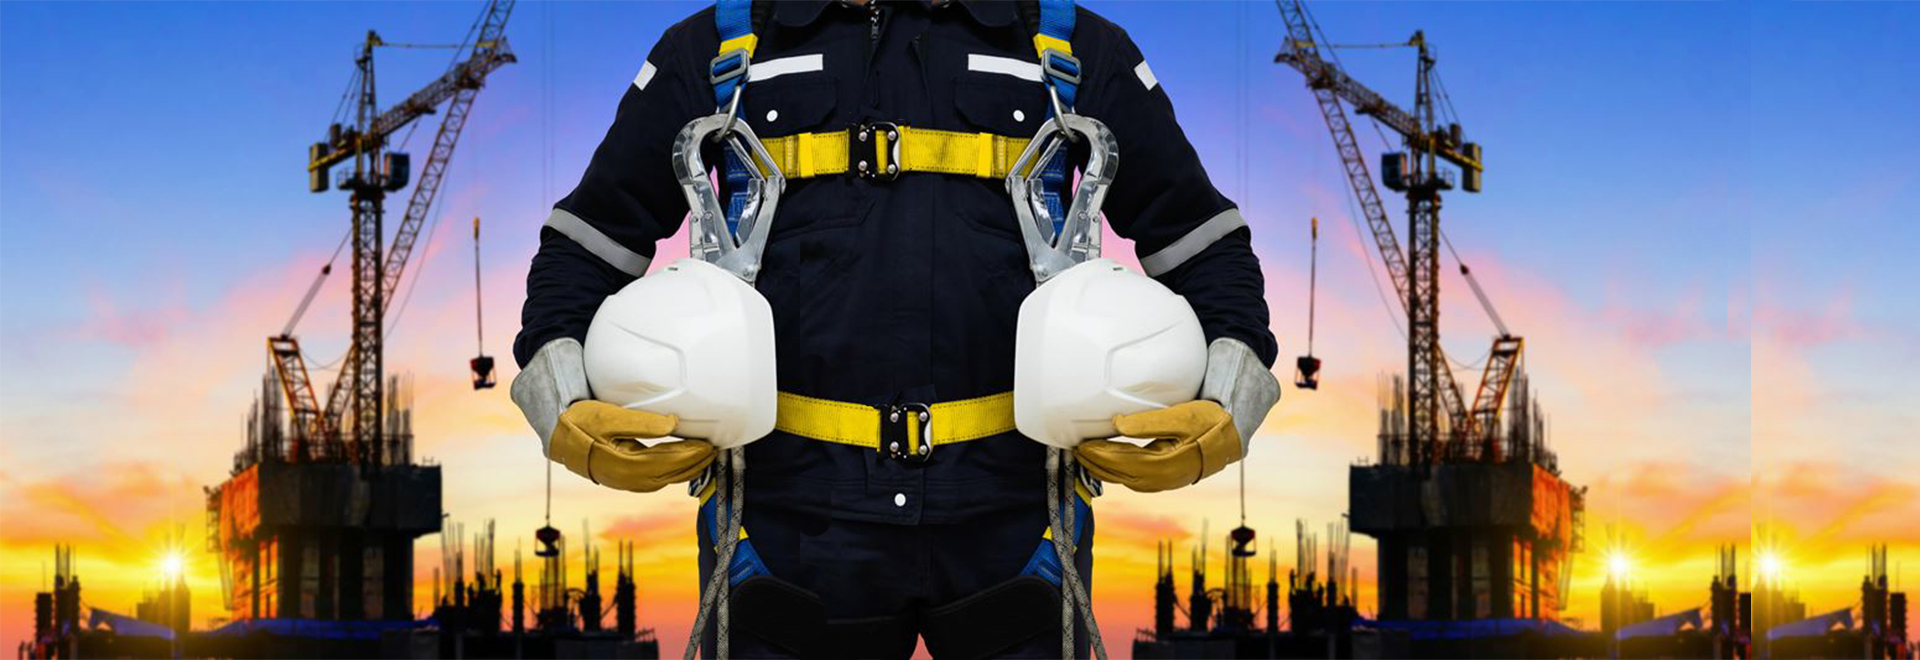 Fall Protection Safety Harness